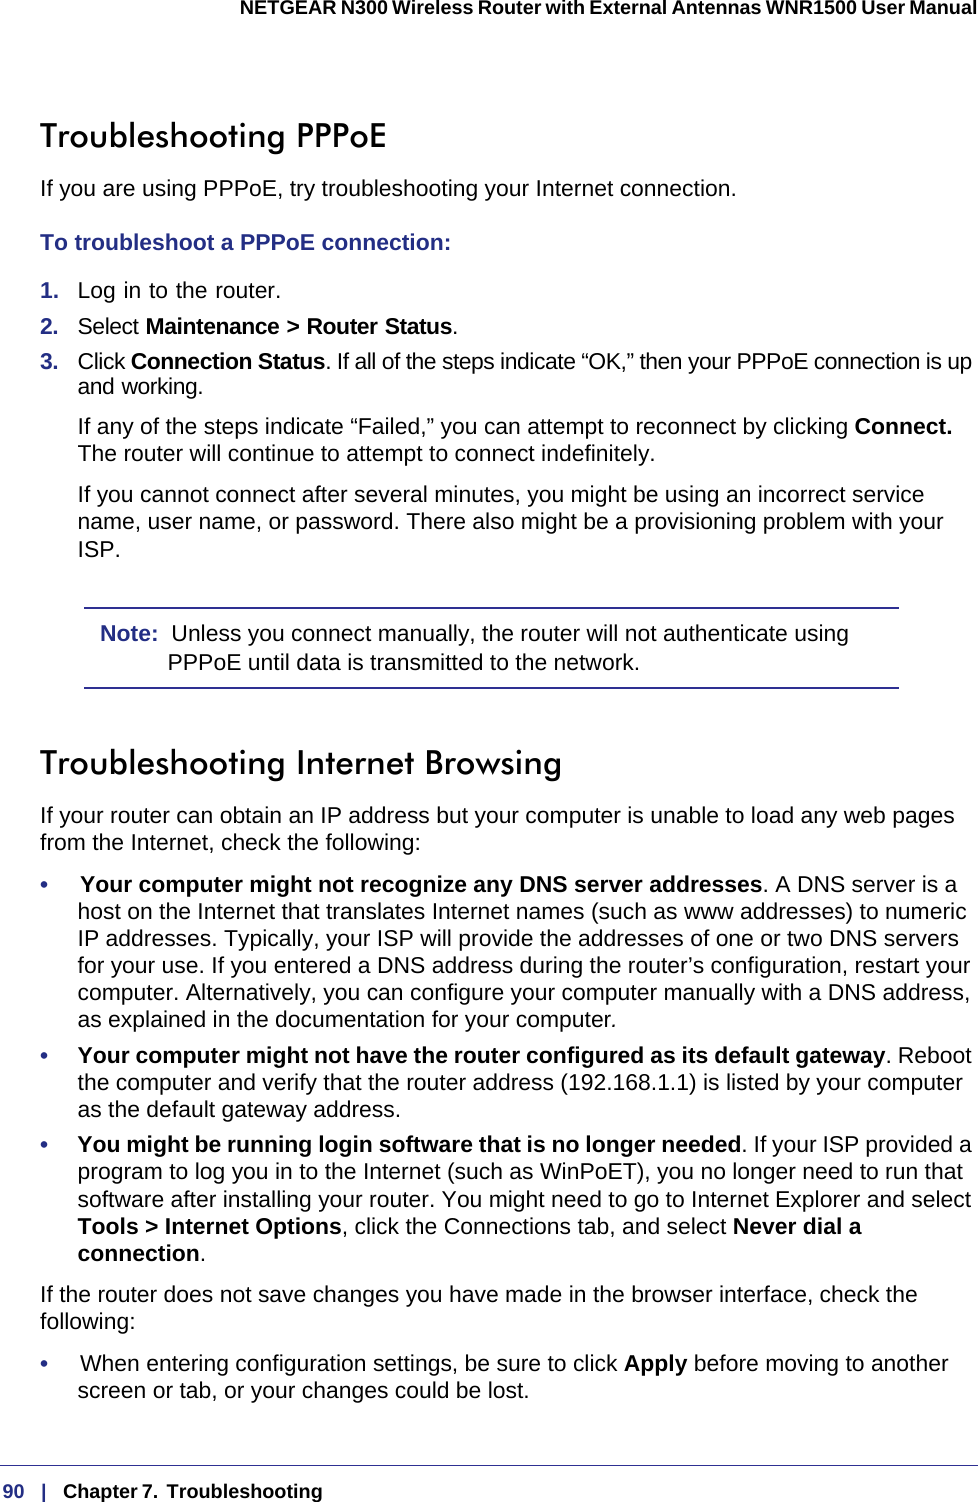 90   |   Chapter 7.  Troubleshooting  NETGEAR N300 Wireless Router with External Antennas WNR1500 User Manual Troubleshooting PPPoEIf you are using PPPoE, try troubleshooting your Internet connection.To troubleshoot a PPPoE connection:1.  Log in to the router.2.  Select Maintenance &gt; Router Status.3.  Click Connection Status. If all of the steps indicate “OK,” then your PPPoE connection is up and working.If any of the steps indicate “Failed,” you can attempt to reconnect by clicking Connect. The router will continue to attempt to connect indefinitely.If you cannot connect after several minutes, you might be using an incorrect service name, user name, or password. There also might be a provisioning problem with your ISP.Note:  Unless you connect manually, the router will not authenticate using PPPoE until data is transmitted to the network.Troubleshooting Internet BrowsingIf your router can obtain an IP address but your computer is unable to load any web pages from the Internet, check the following:•     Your computer might not recognize any DNS server addresses. A DNS server is a host on the Internet that translates Internet names (such as www addresses) to numeric IP  addresses. Typically, your ISP will provide the addresses of one or two DNS servers for your use. If you entered a DNS address during the router’s configuration, restart your computer. Alternatively, you can configure your computer manually with a DNS address, as explained in the documentation for your computer.•     Your computer might not have the router configured as its default gateway. Reboot the computer and verify that the router address (192.168.1.1) is listed by your computer as the default gateway address.•     You might be running login software that is no longer needed. If your ISP provided a program to log you in to the Internet (such as WinPoET), you no longer need to run that software after installing your router. You might need to go to Internet Explorer and select Tools &gt; Internet Options, click the Connections tab, and select Never dial a connection.If the router does not save changes you have made in the browser interface, check the following:•     When entering configuration settings, be sure to click Apply before moving to another screen or tab, or your changes could be lost. 